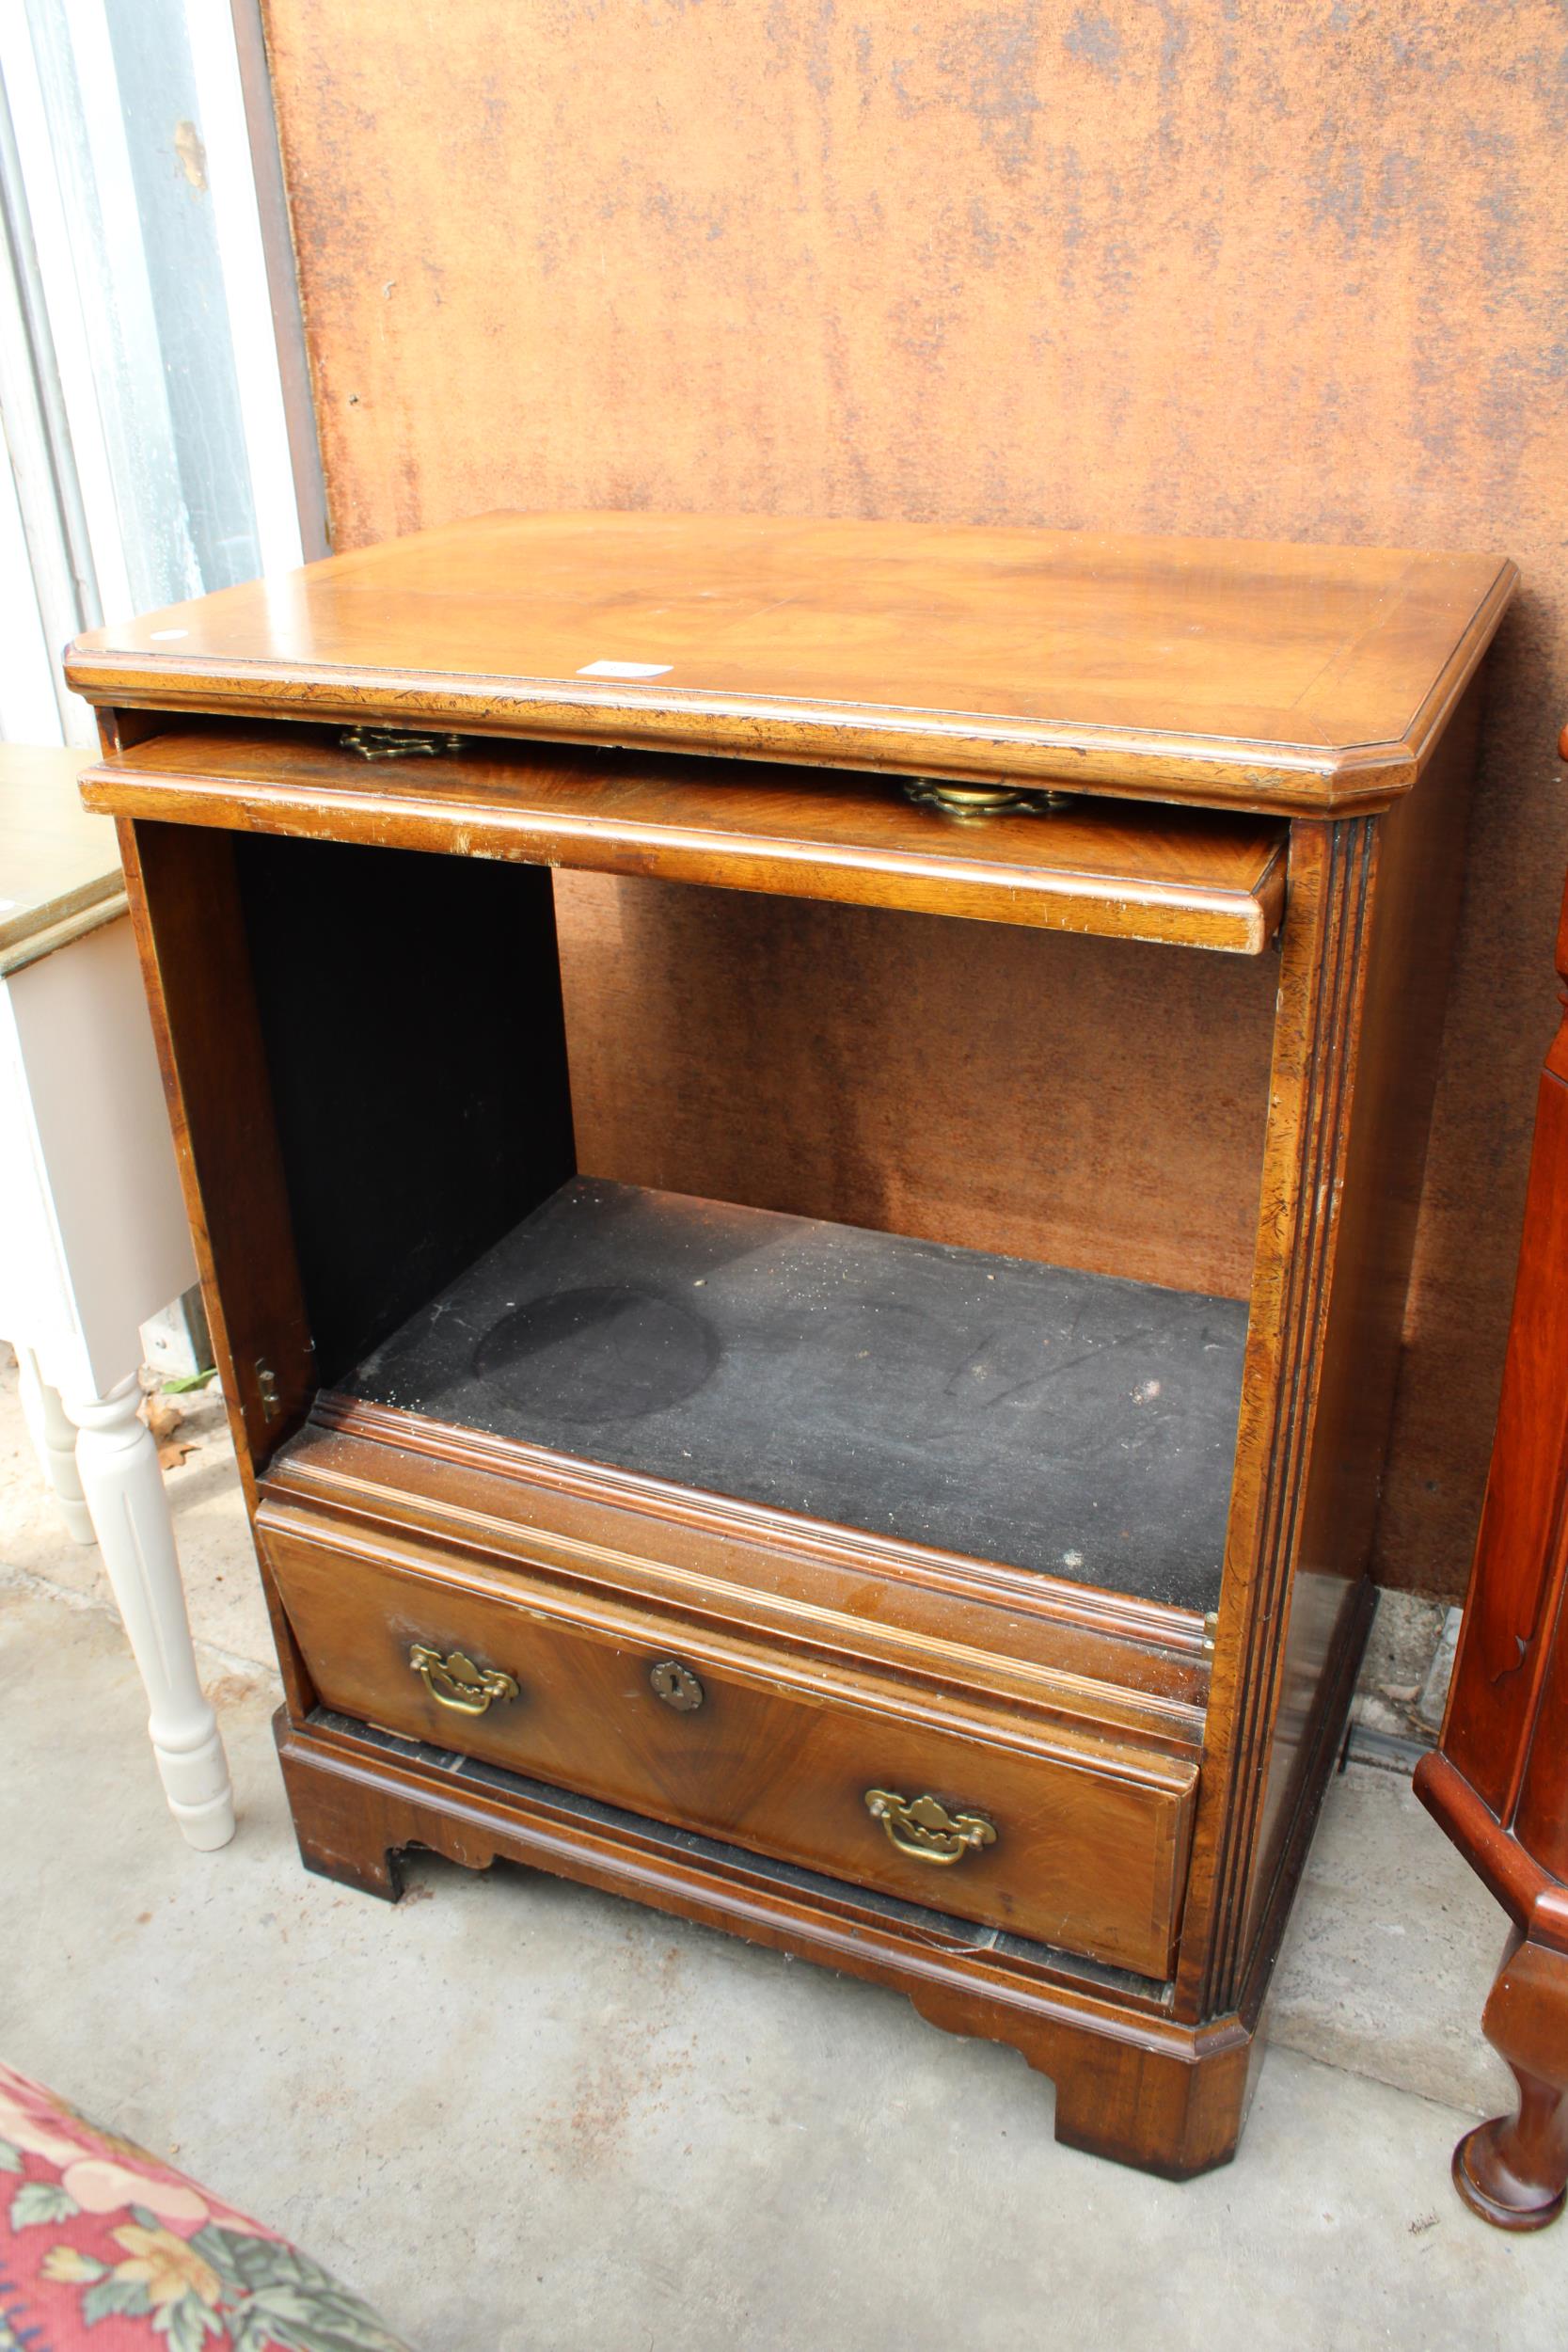 AN ANTIQUE STYLE WALNUT AND CROSS BANDED UNIT IN THE FORM OF A CHEST OF DRAWERS, 27" WIDE - Image 2 of 2